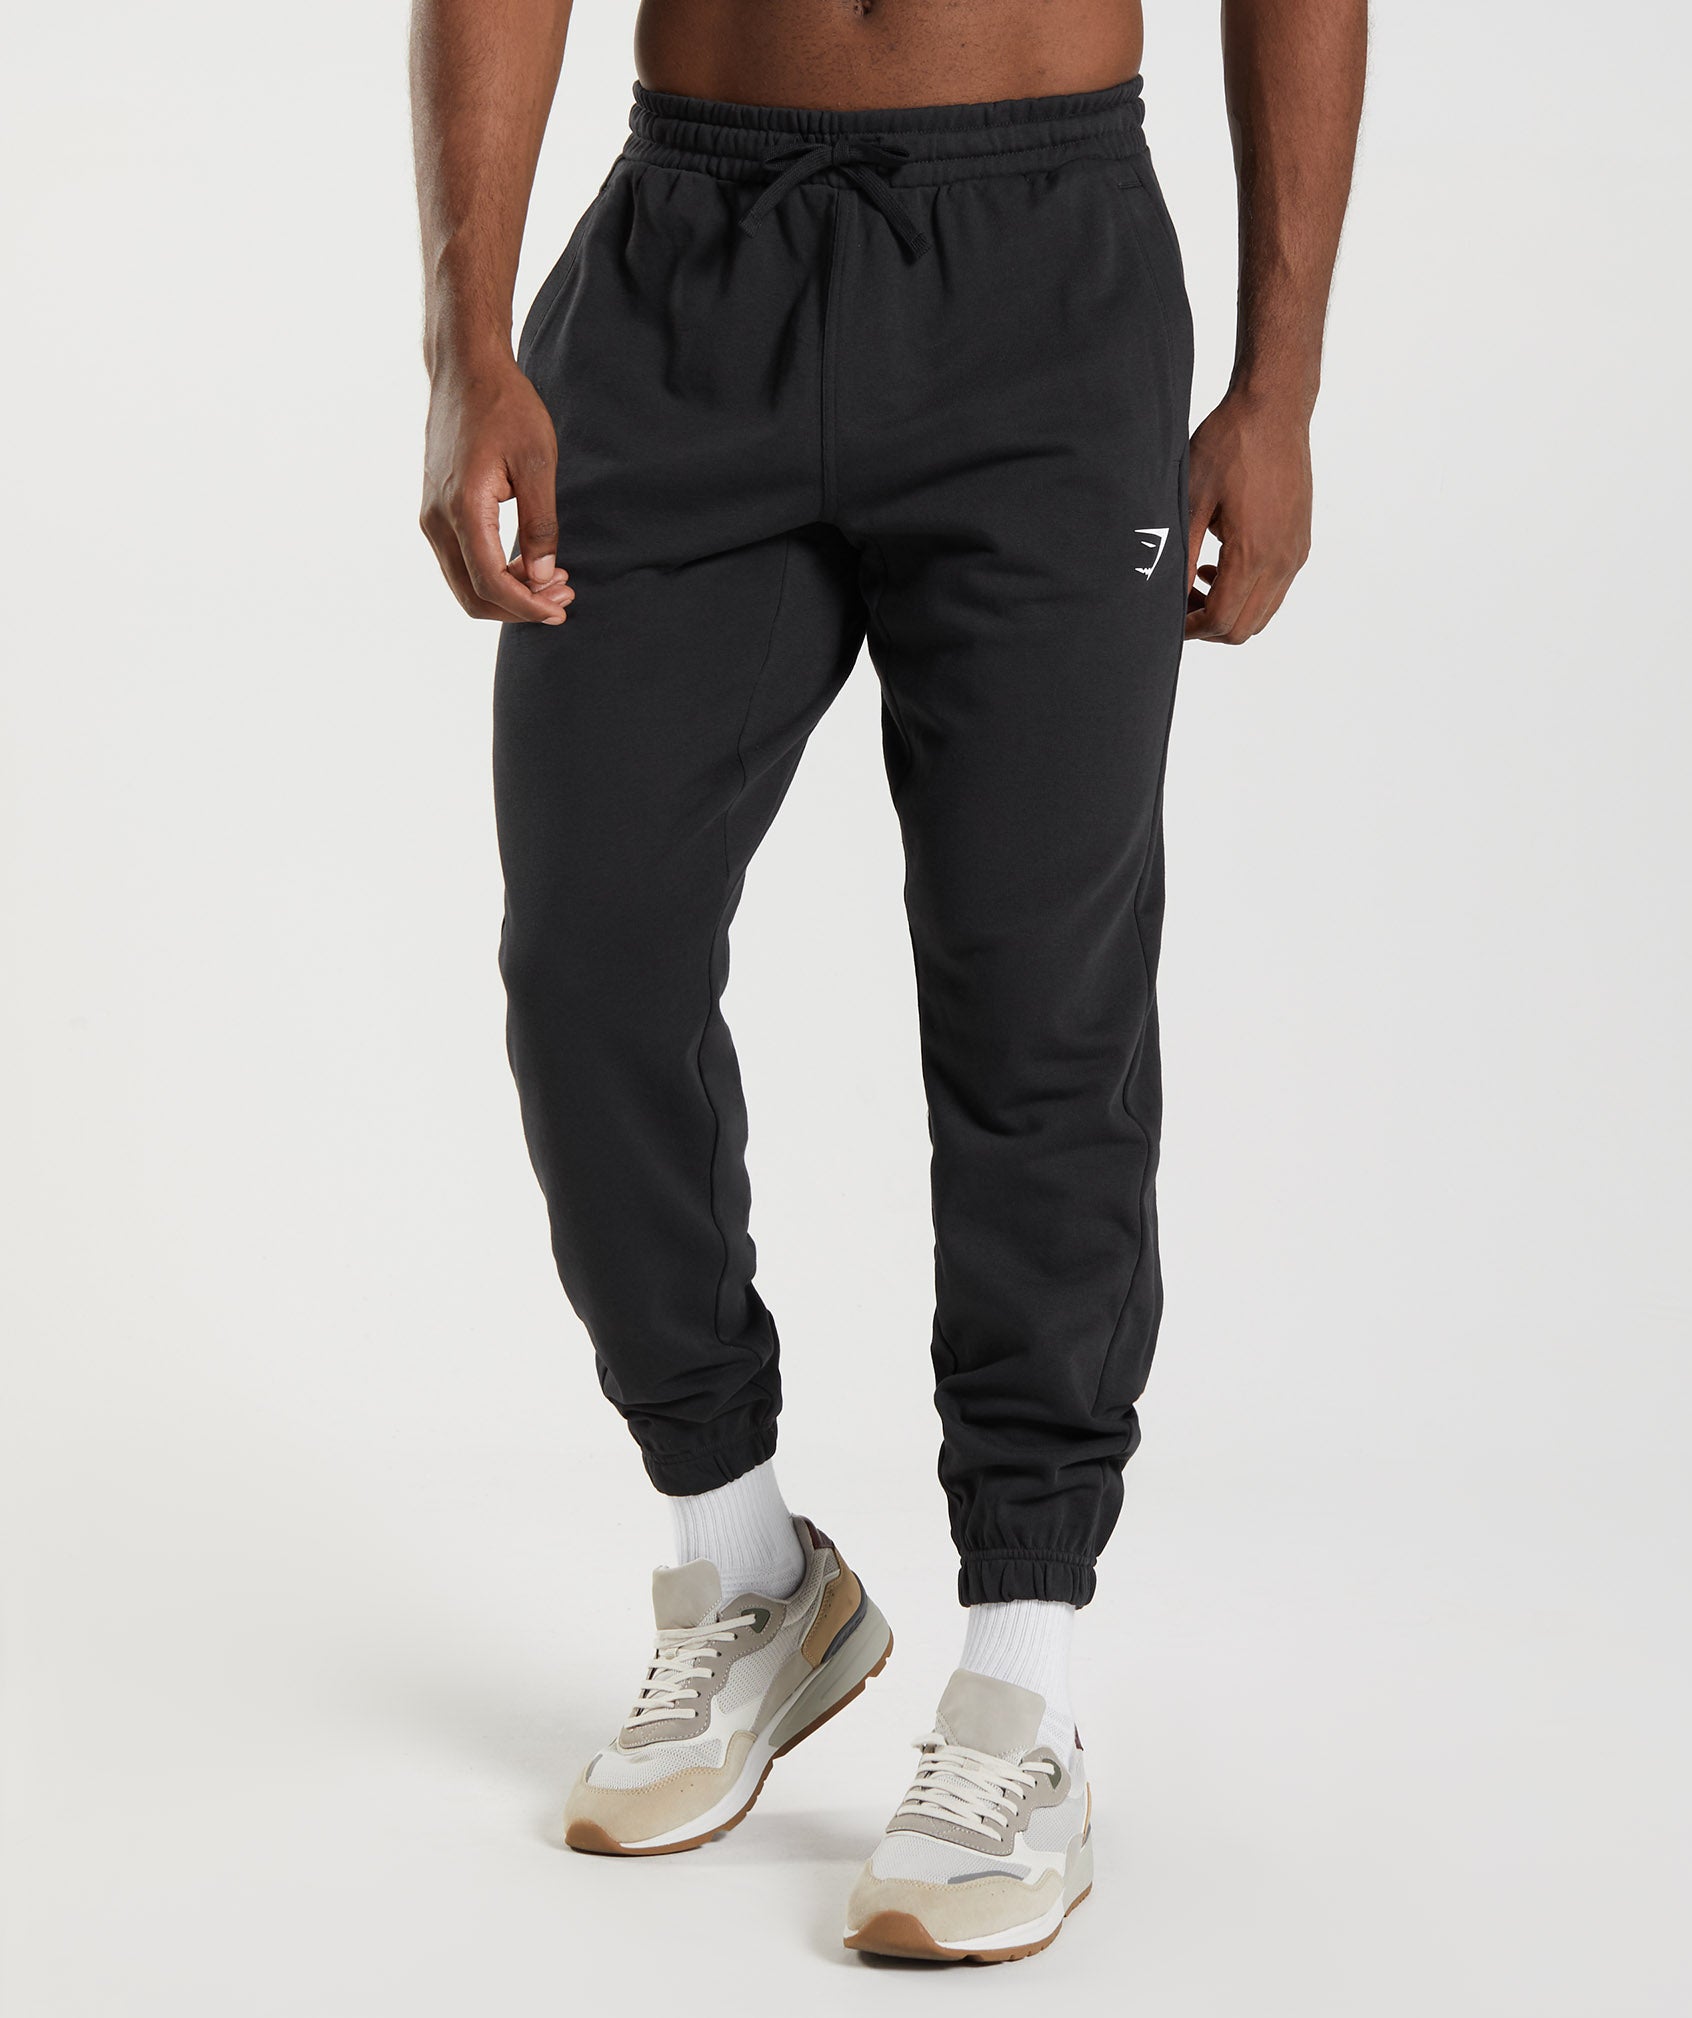 Gymshark Crest Joggers - Light Grey Marl – Client 446 100K products